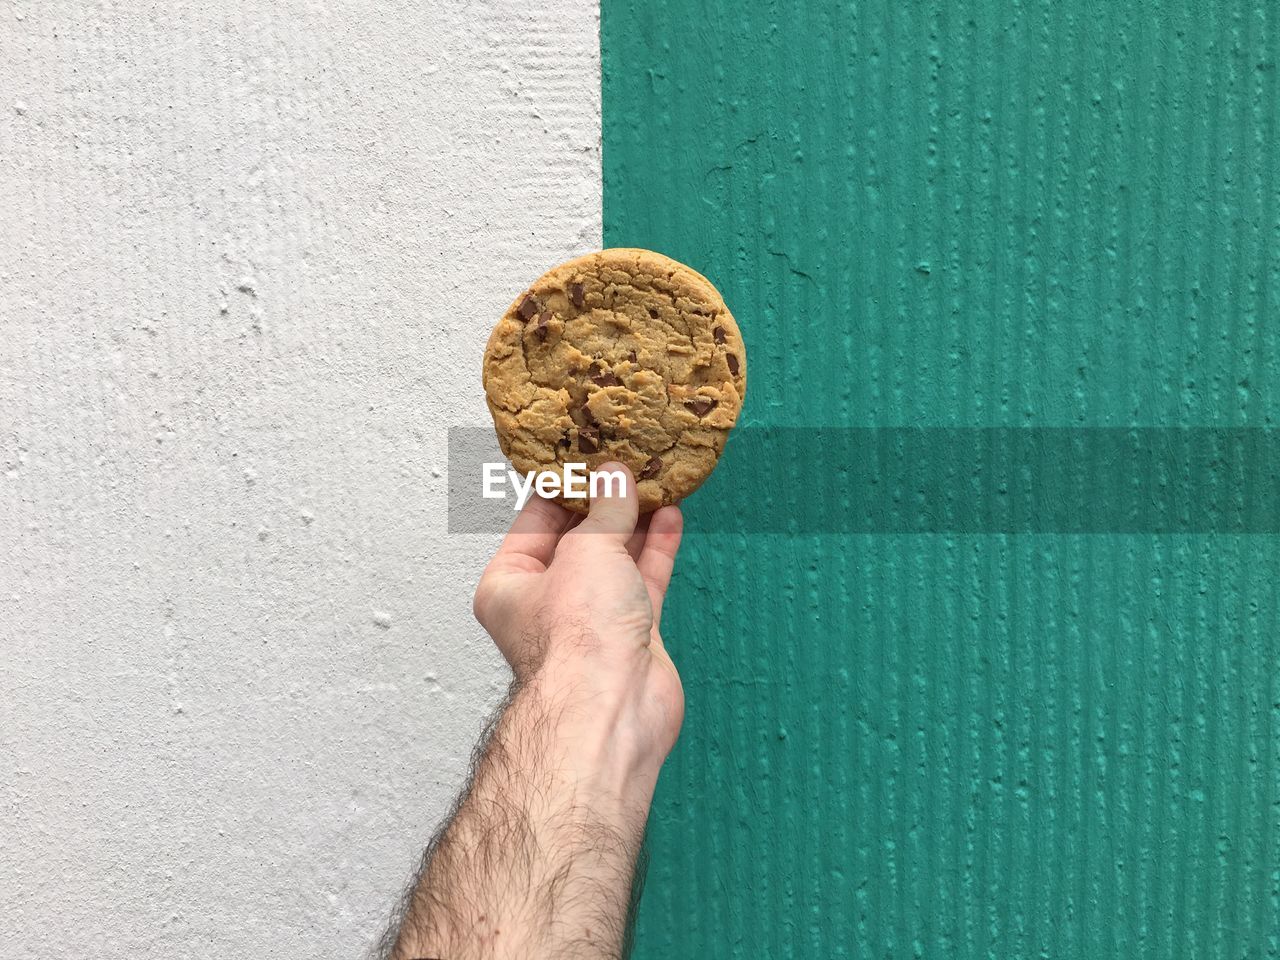 Cropped image of hand holding cookie against wall